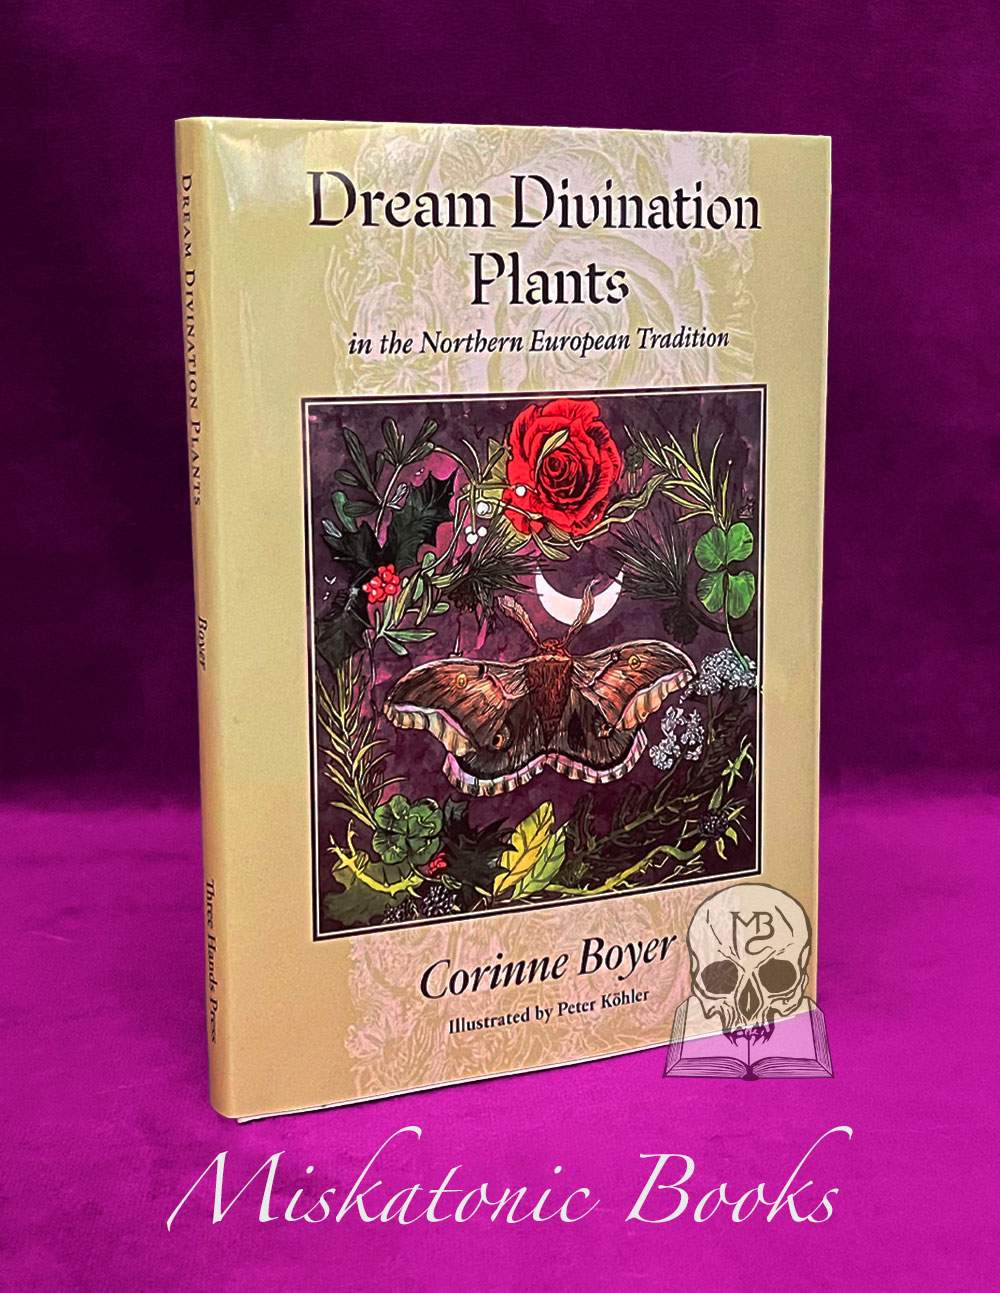 DREAM DIVINATION PLANTS IN THE NORTHERN EUROPEAN TRADITION by Corinne Boyer - Limited Edition Hardcover